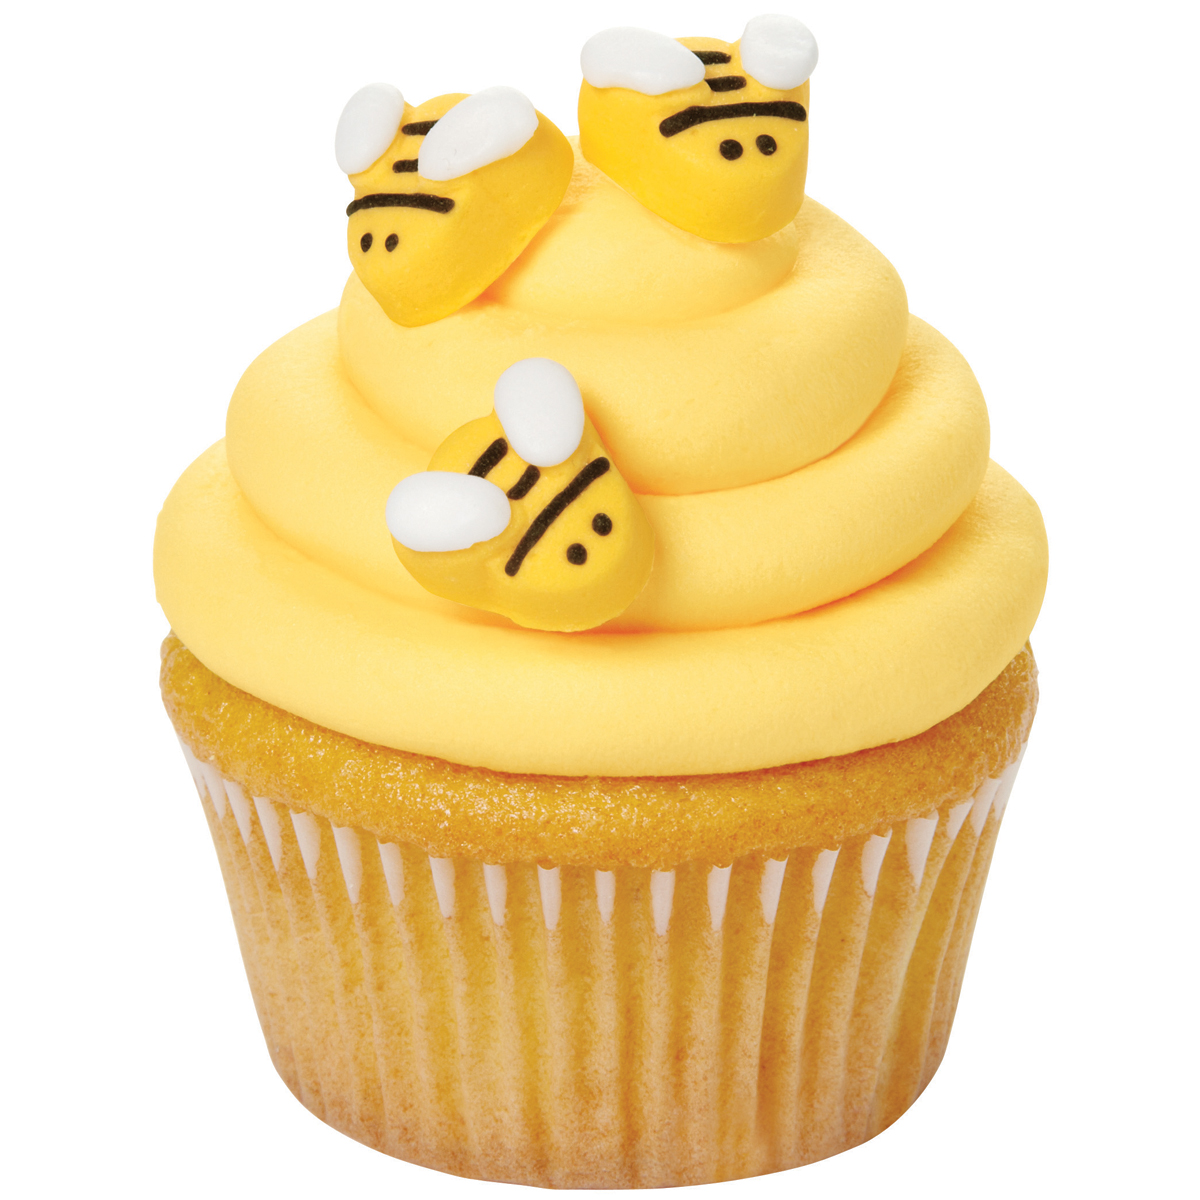 Wilton Bumble Bee Icing Decorations, Yellow, 18-Count 